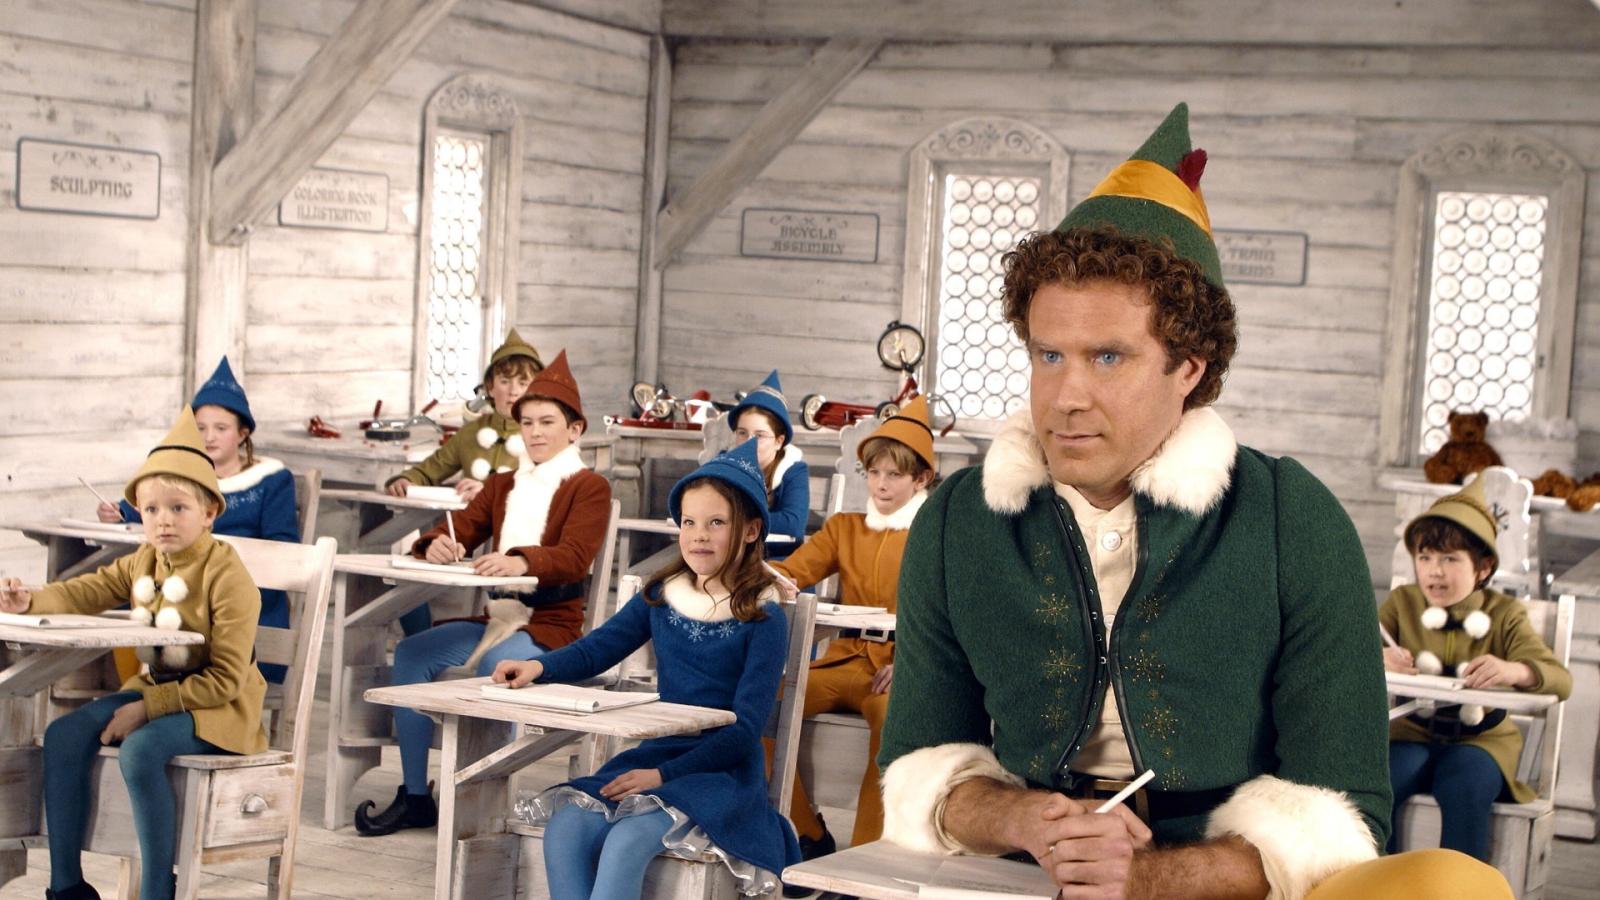 Will Ferrell's 10 Best Movies, as Rated by Rotten Tomatoes - Figure 1